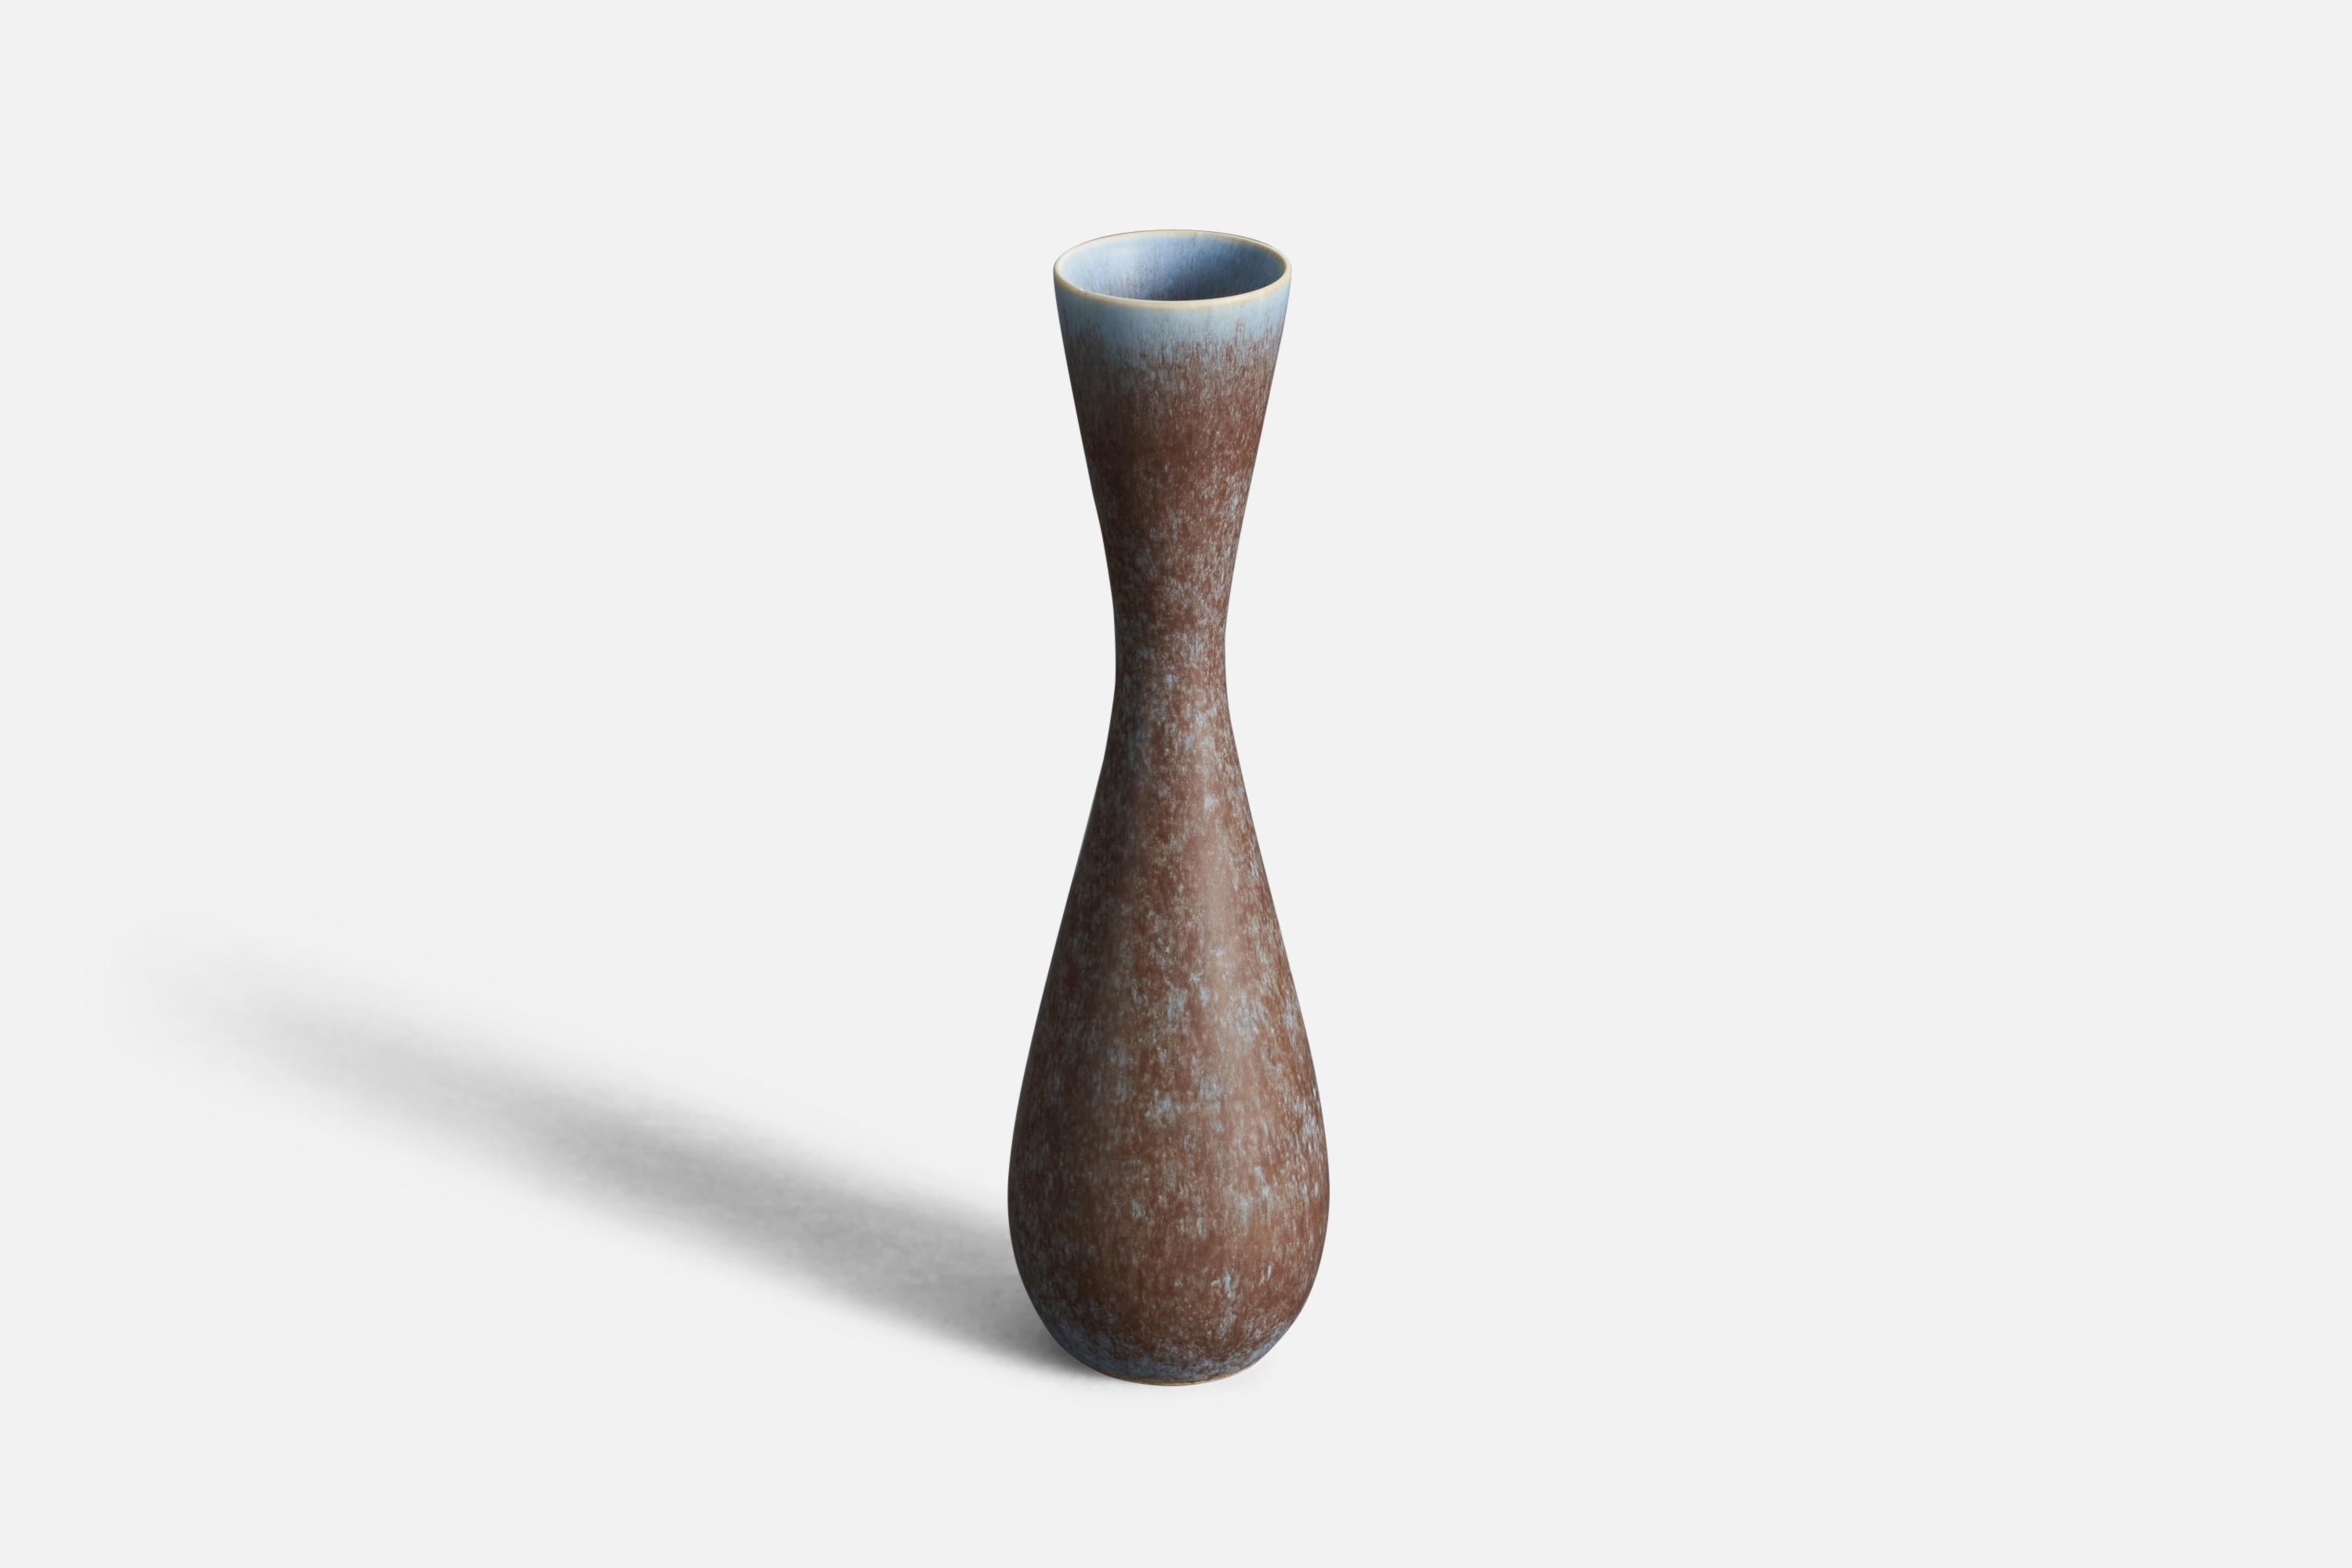 A stoneware vase designed by Carl-Harry Stålhane and produced by Rörstrand, Sweden, 1950s.